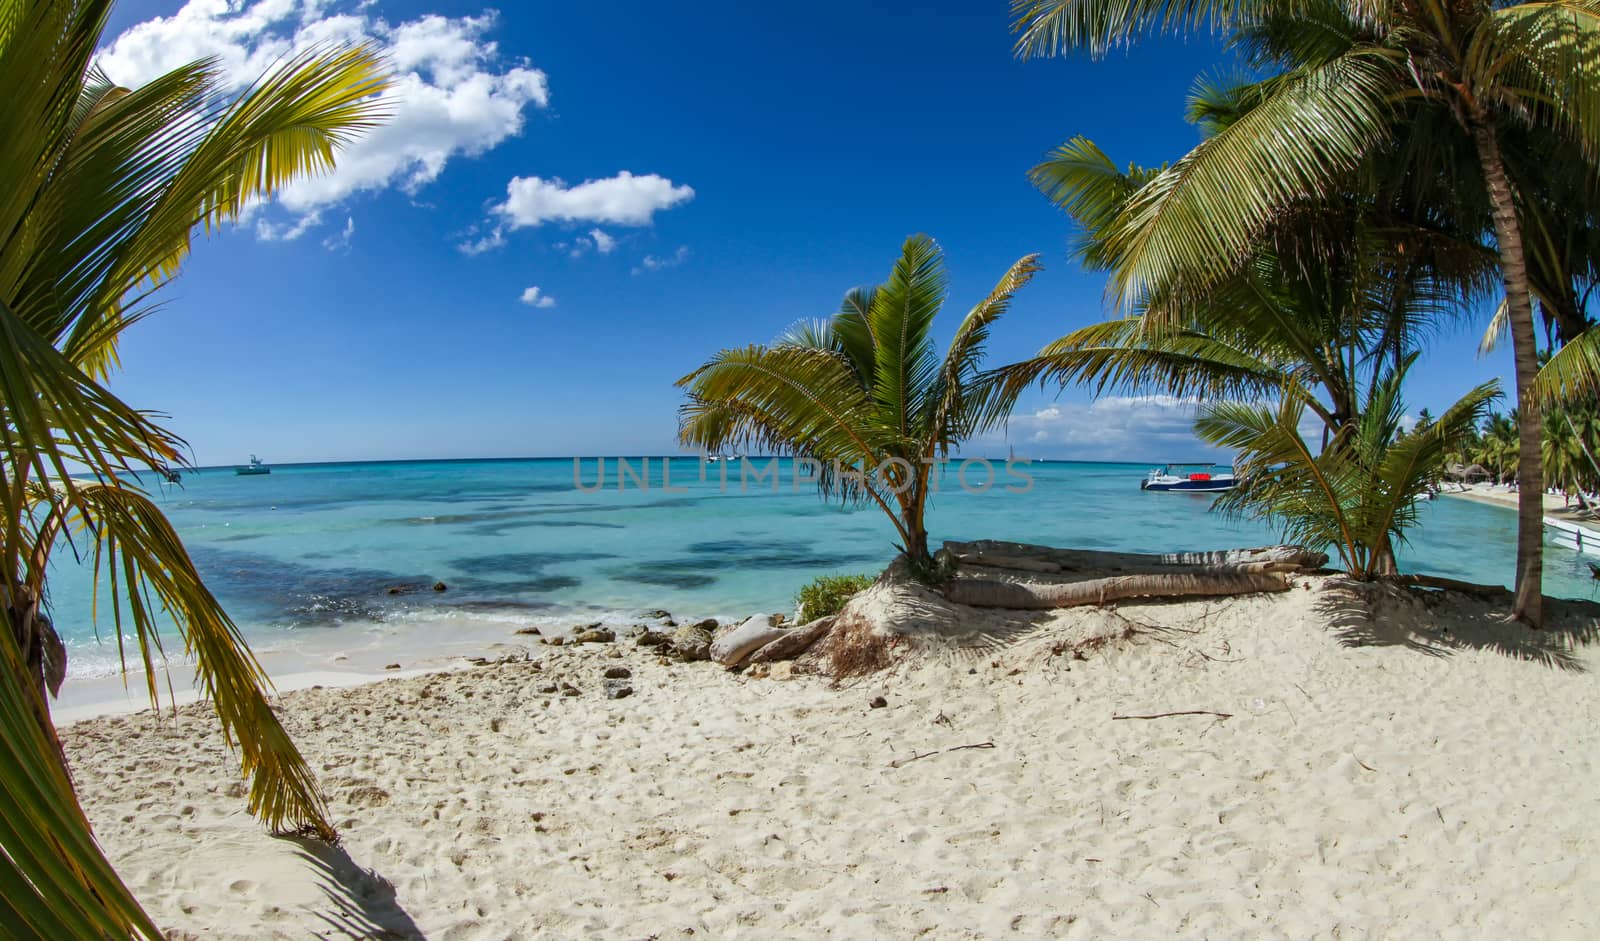 A small family of beautiful palm trees sit together at the edge of the sand on a beach on Saona Island near Punta Cana.